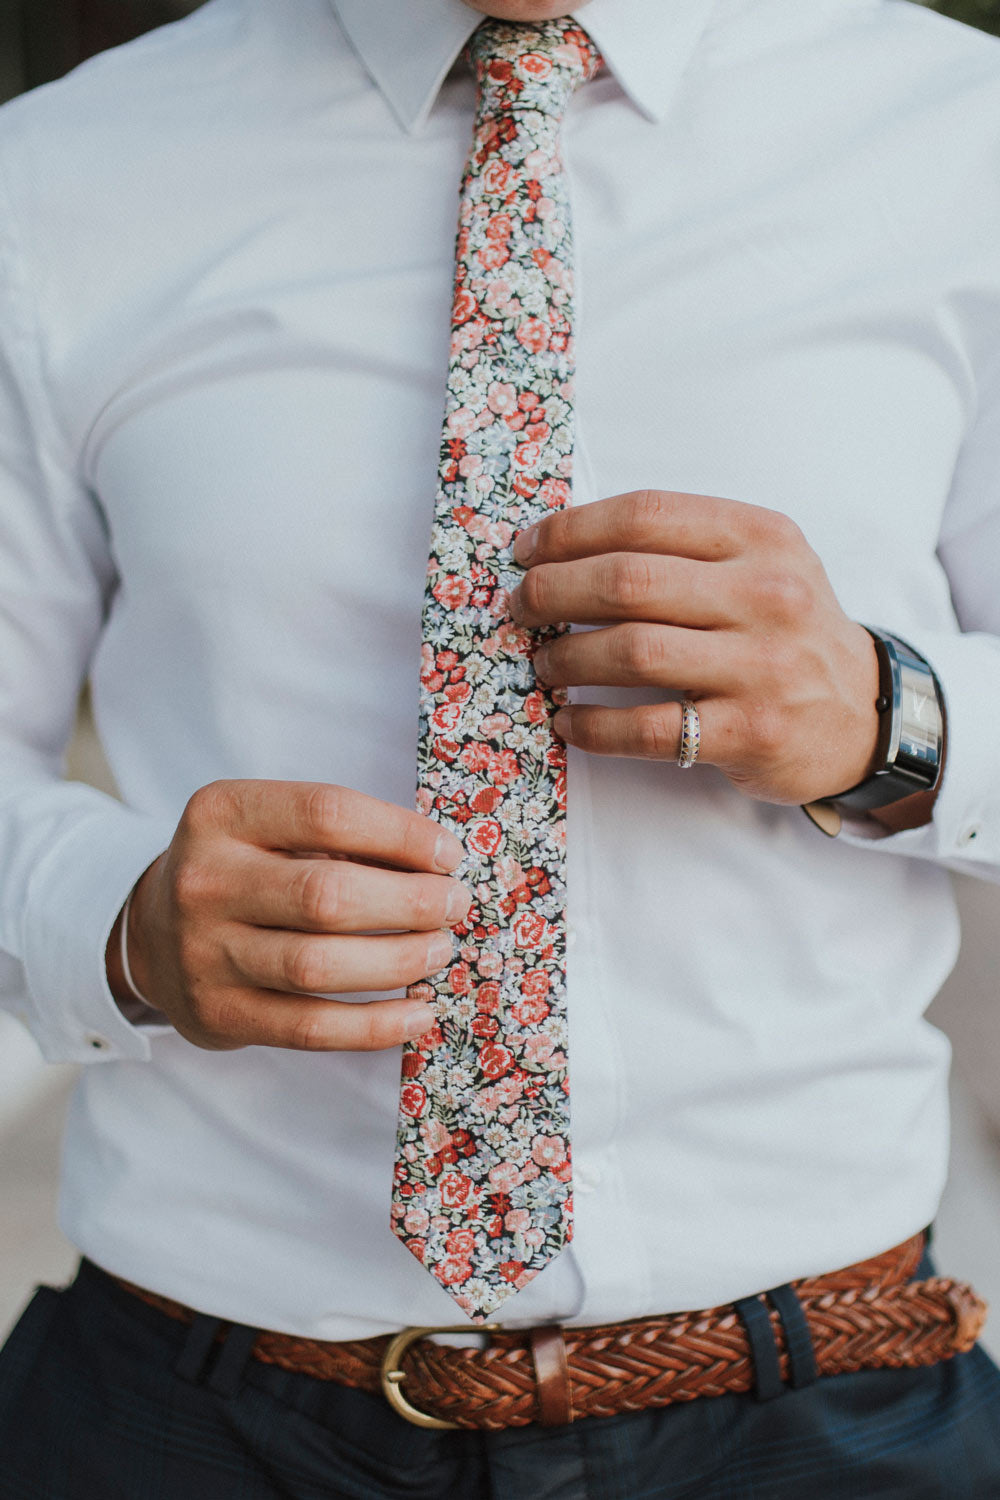 Bed of Roses tie worn with a white shirt, brown belt and blue pants.